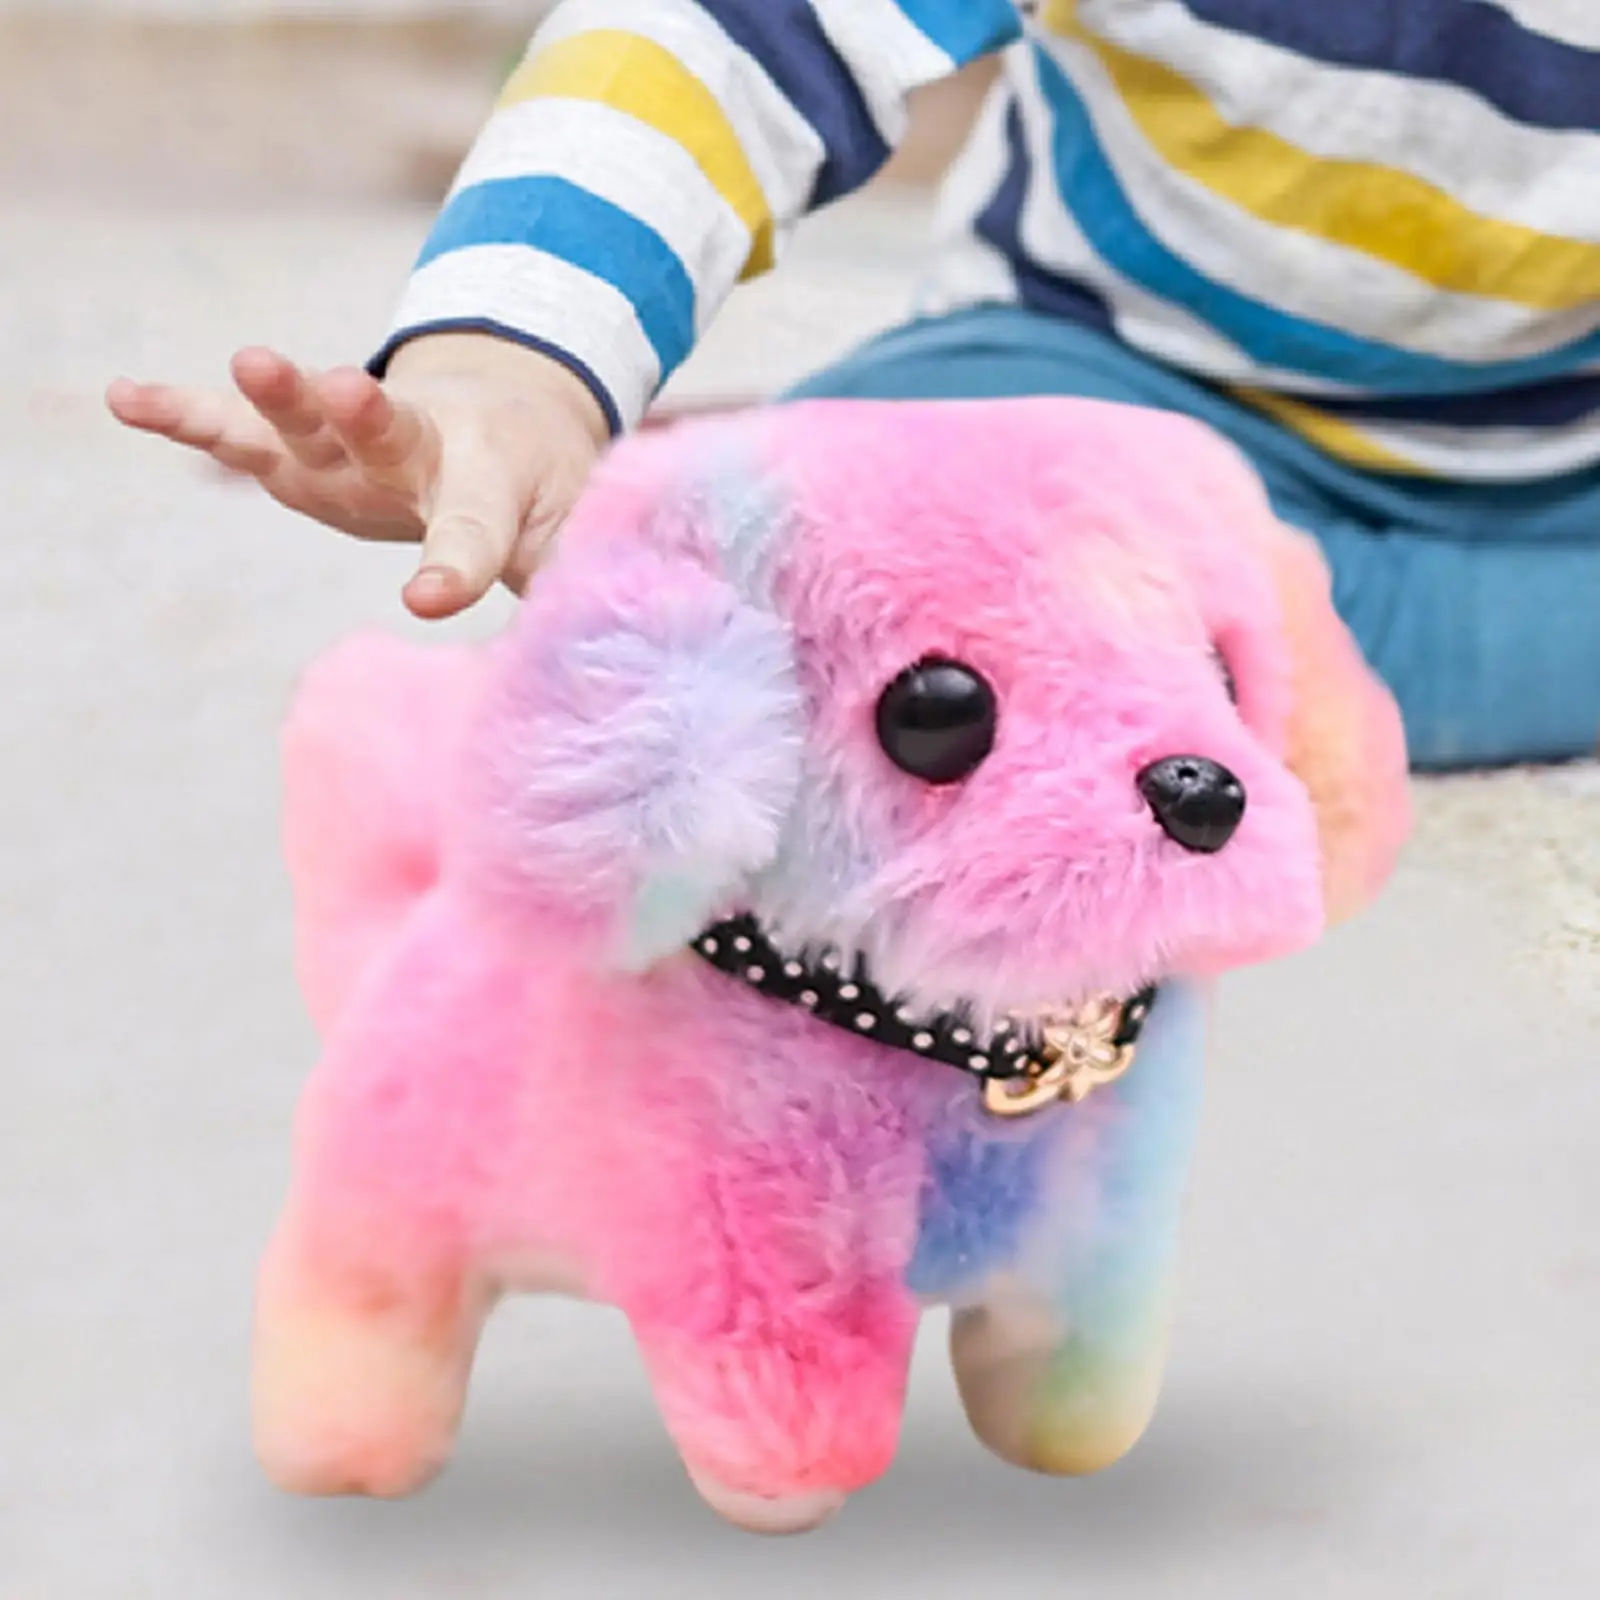 Interactive Electronic Pet with Sound Novelty Soft Plush Toy for Birthday Gifts Children Toys Bedtime Friend Age 3+ Boys Girls